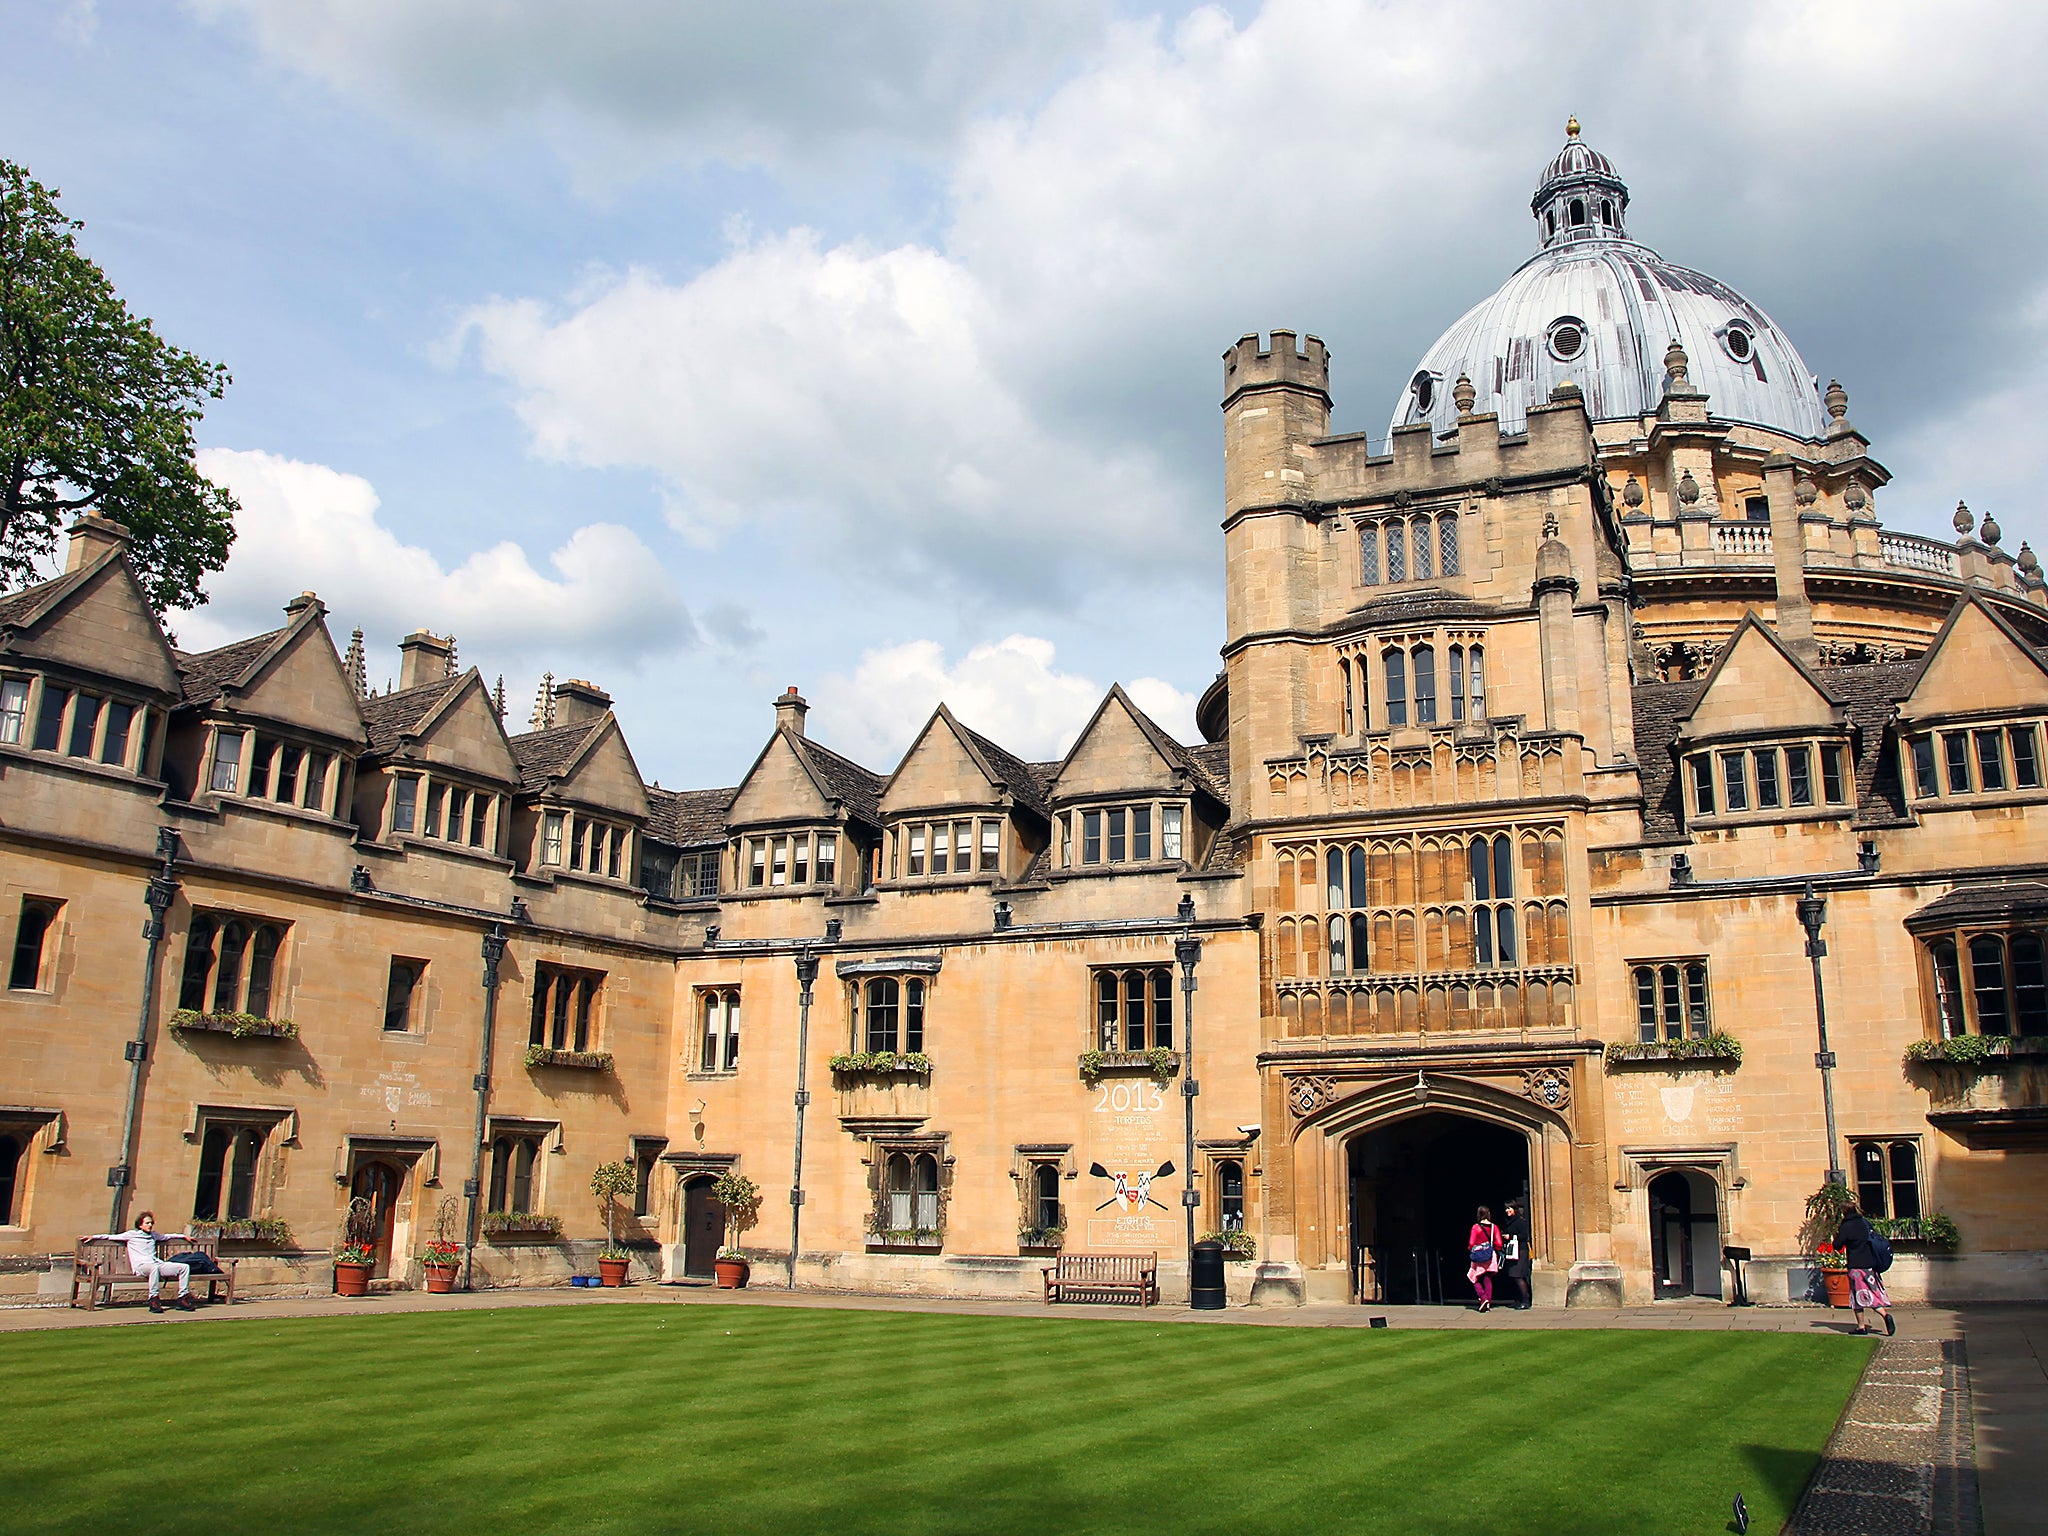 Faiz Siddiqui studied at Brasenose College, graduating with a 2:1 degree